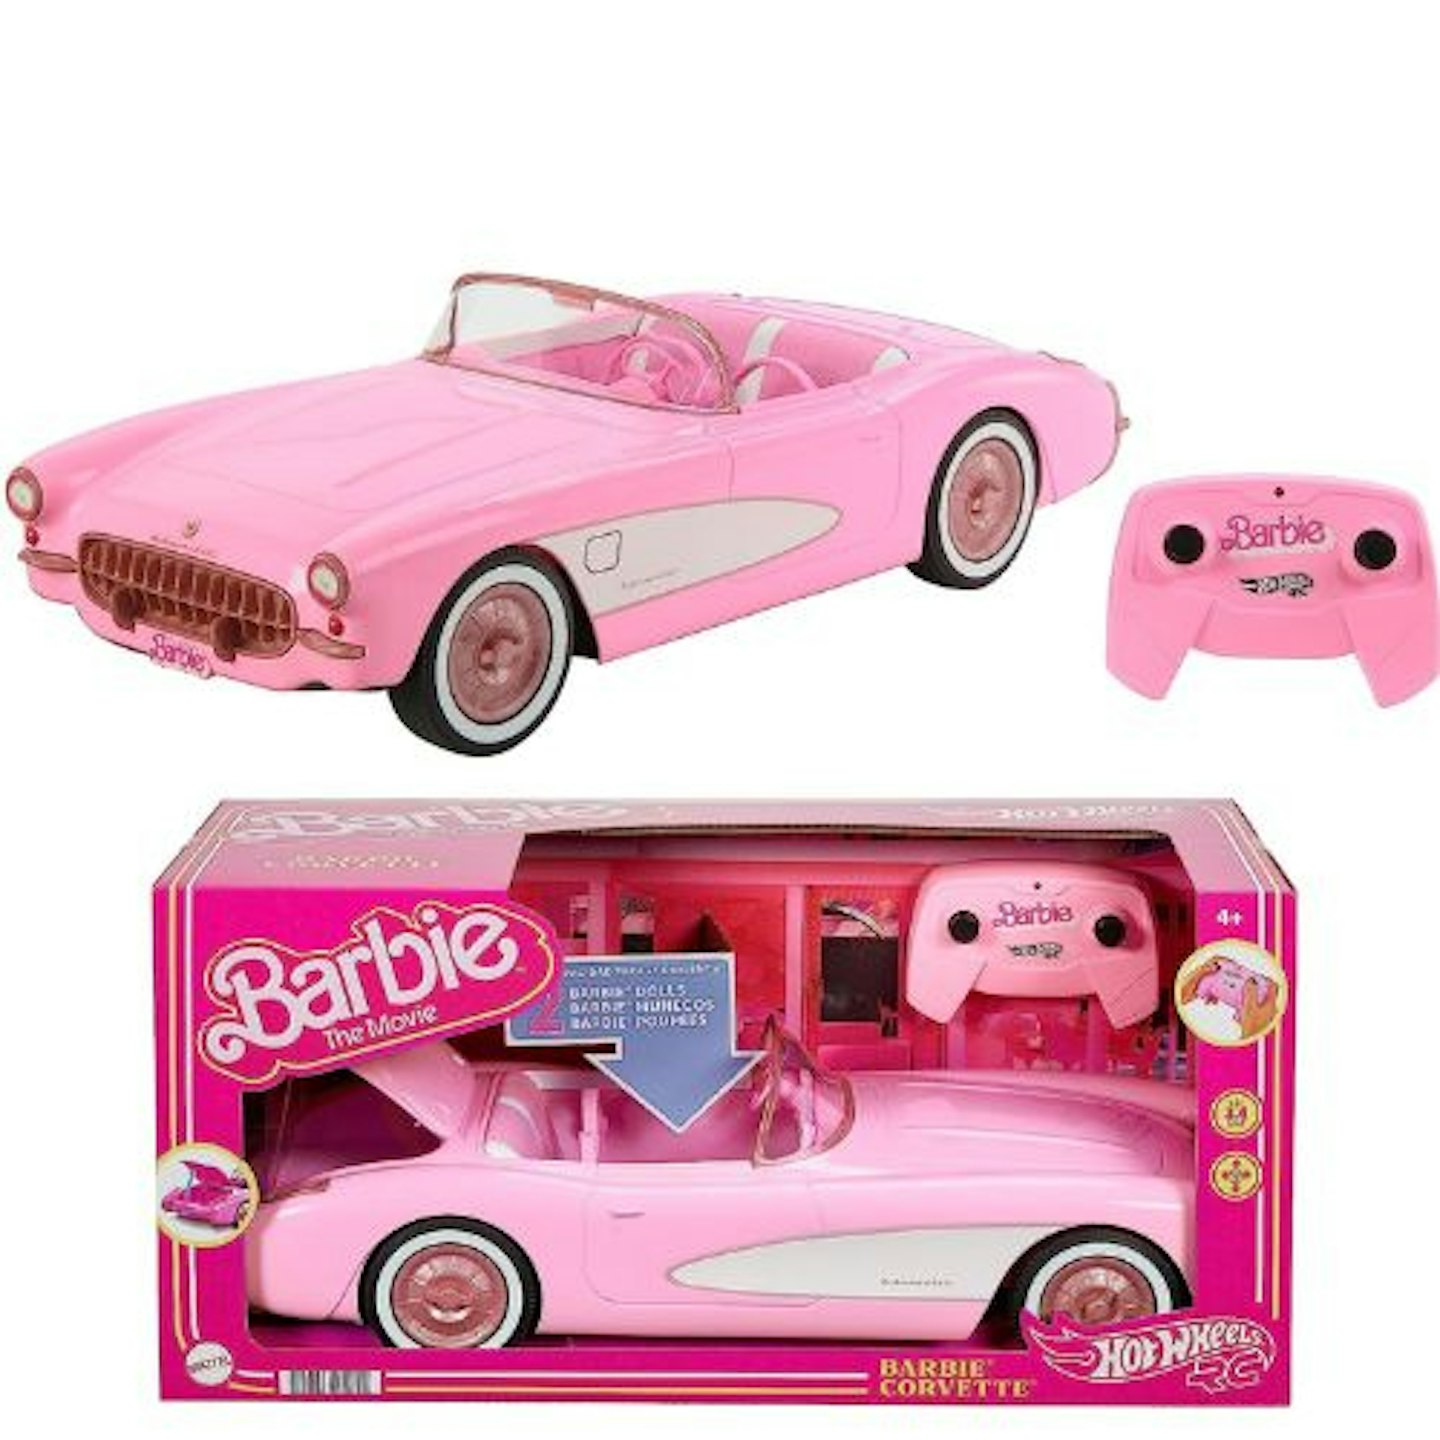 Best Barbie Toys: Hot Wheels RC Barbie Corvette, Battery-Operated Remote-Control Toy Car From Barbie The Movie